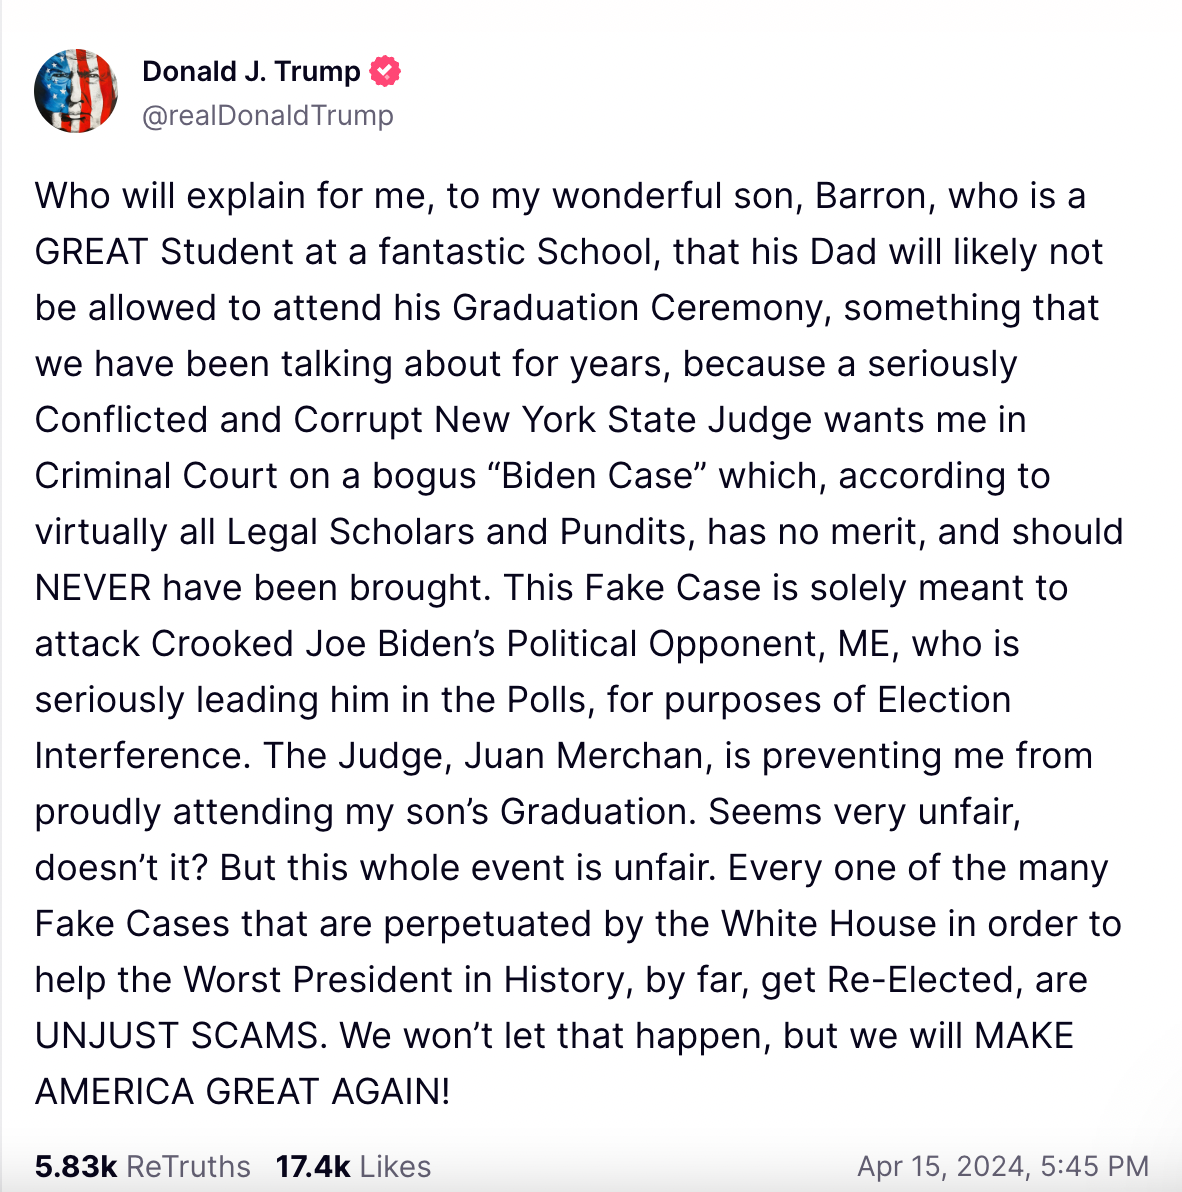 Mr Trump purported that the judge made an unfair ruling preventing him from attending his son’s graduation